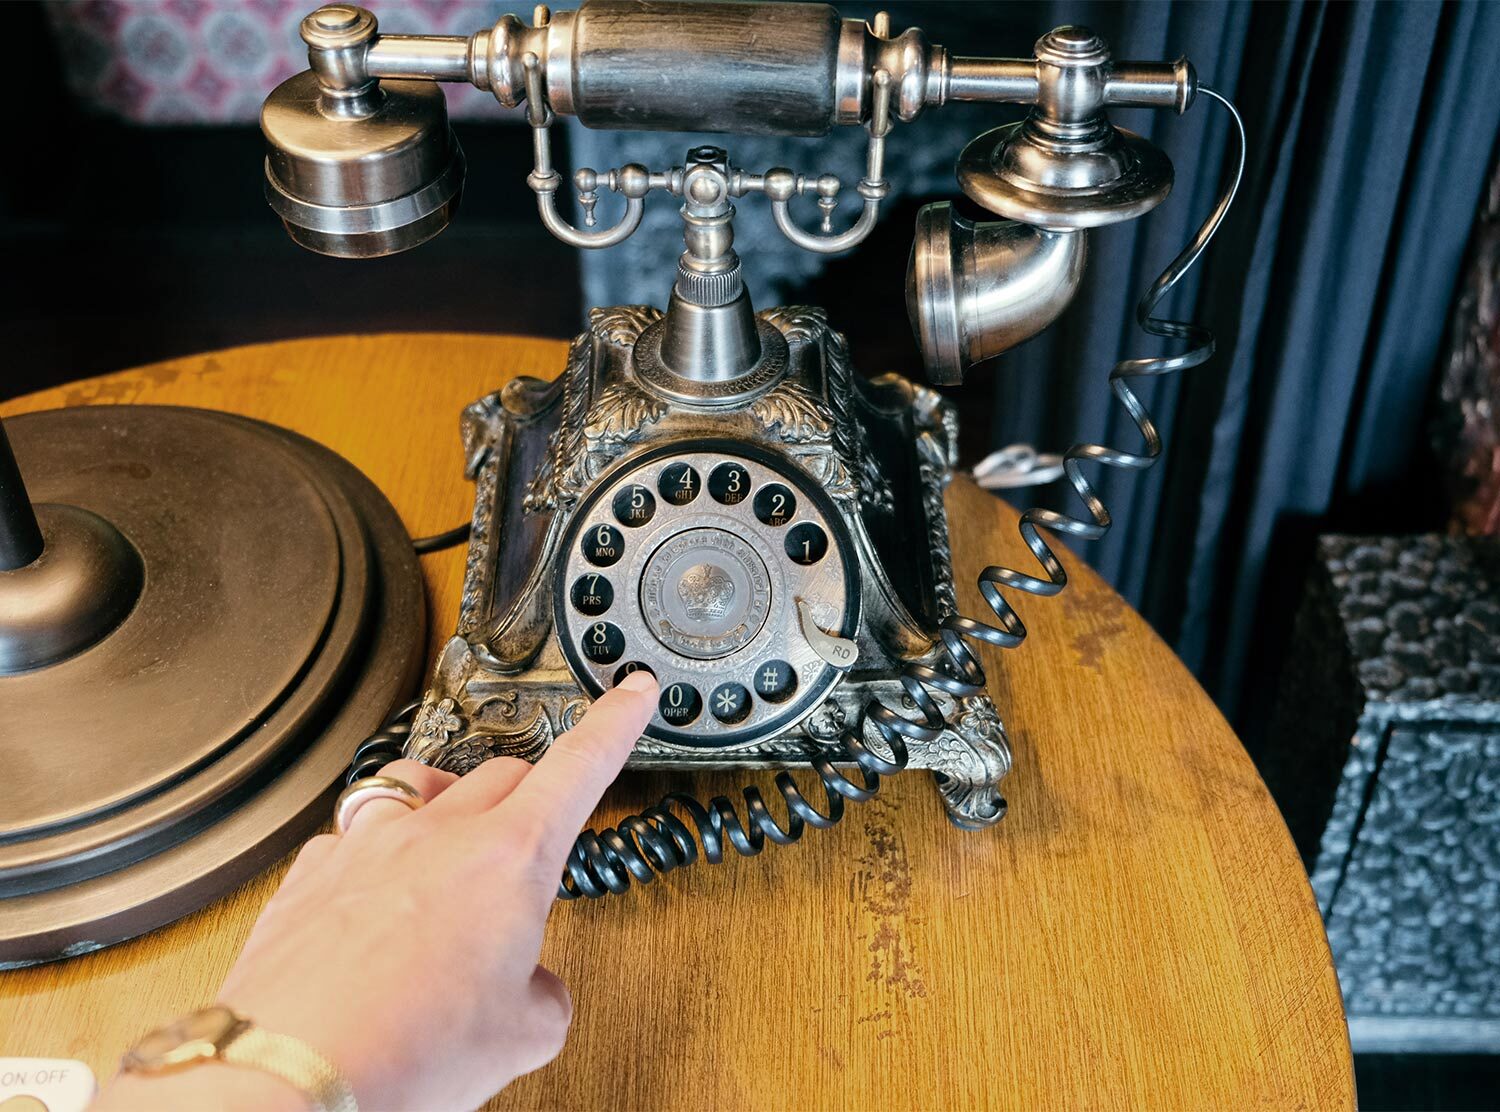 Capella Ubud At the check-in, the staff welcomes you into the 19th century Bali dream, and this phone is the best way to call your personally assigned butler!